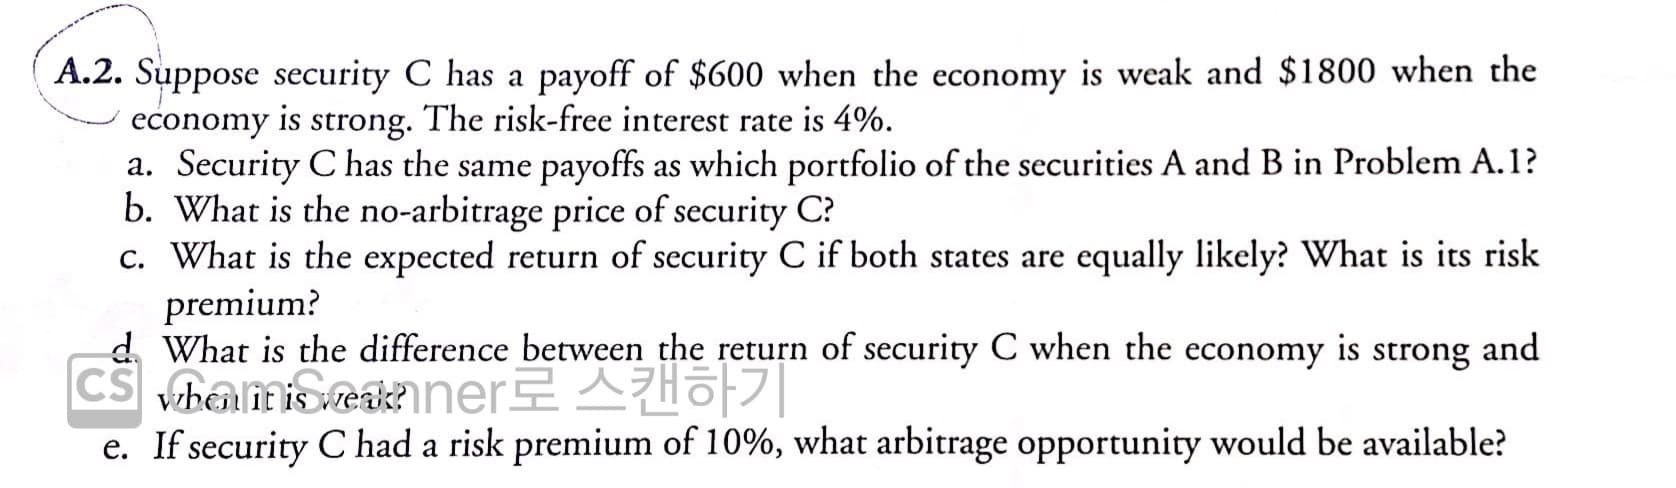 A.2. Suppose security C has a payoff of $600 when the economy is weak and $1800 when the
economy
is
strong.
The risk-free interest rate is 4%.
a. Security C has the same payoffs as which portfolio of the securities A and B in Problem A.1?
b. What is the no-arbitrage price of security C?
c. What is the expected return of security C if both states are equally likely? What is its risk
premium?
d. What is the difference between the return of security C when the economy is strong and
CS bamoeaner AHo|
e. If security C had a risk premium of 10%, what arbitrage opportunity would be available?
1t
